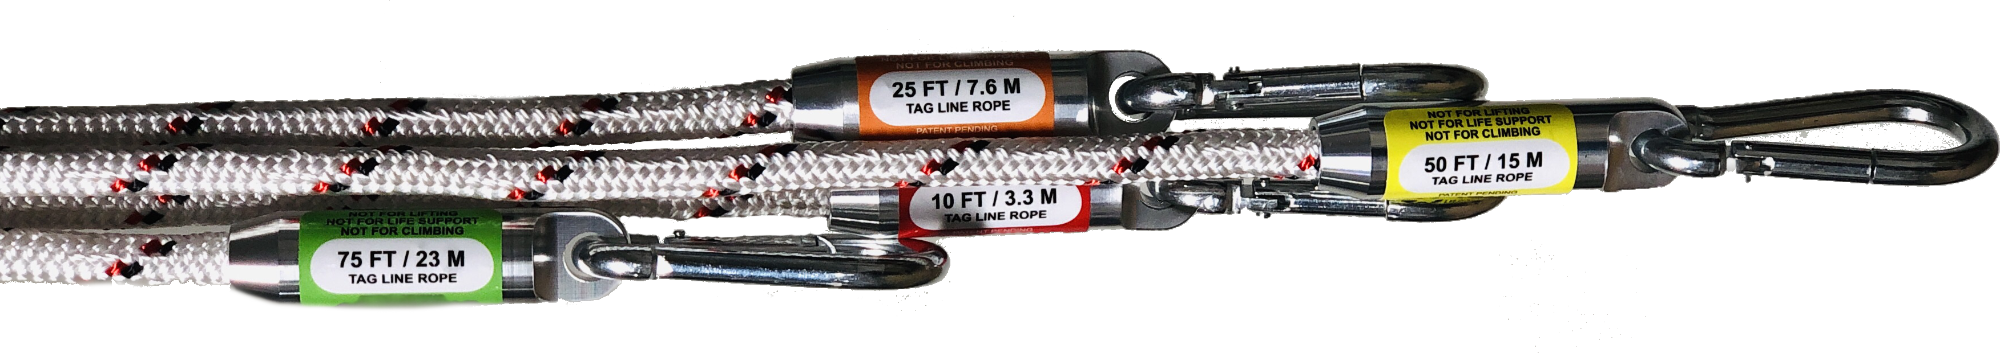 Custom Built Tag Line Ropes and Tethers - We build custom tag line and  tether ropes for suspended load control.